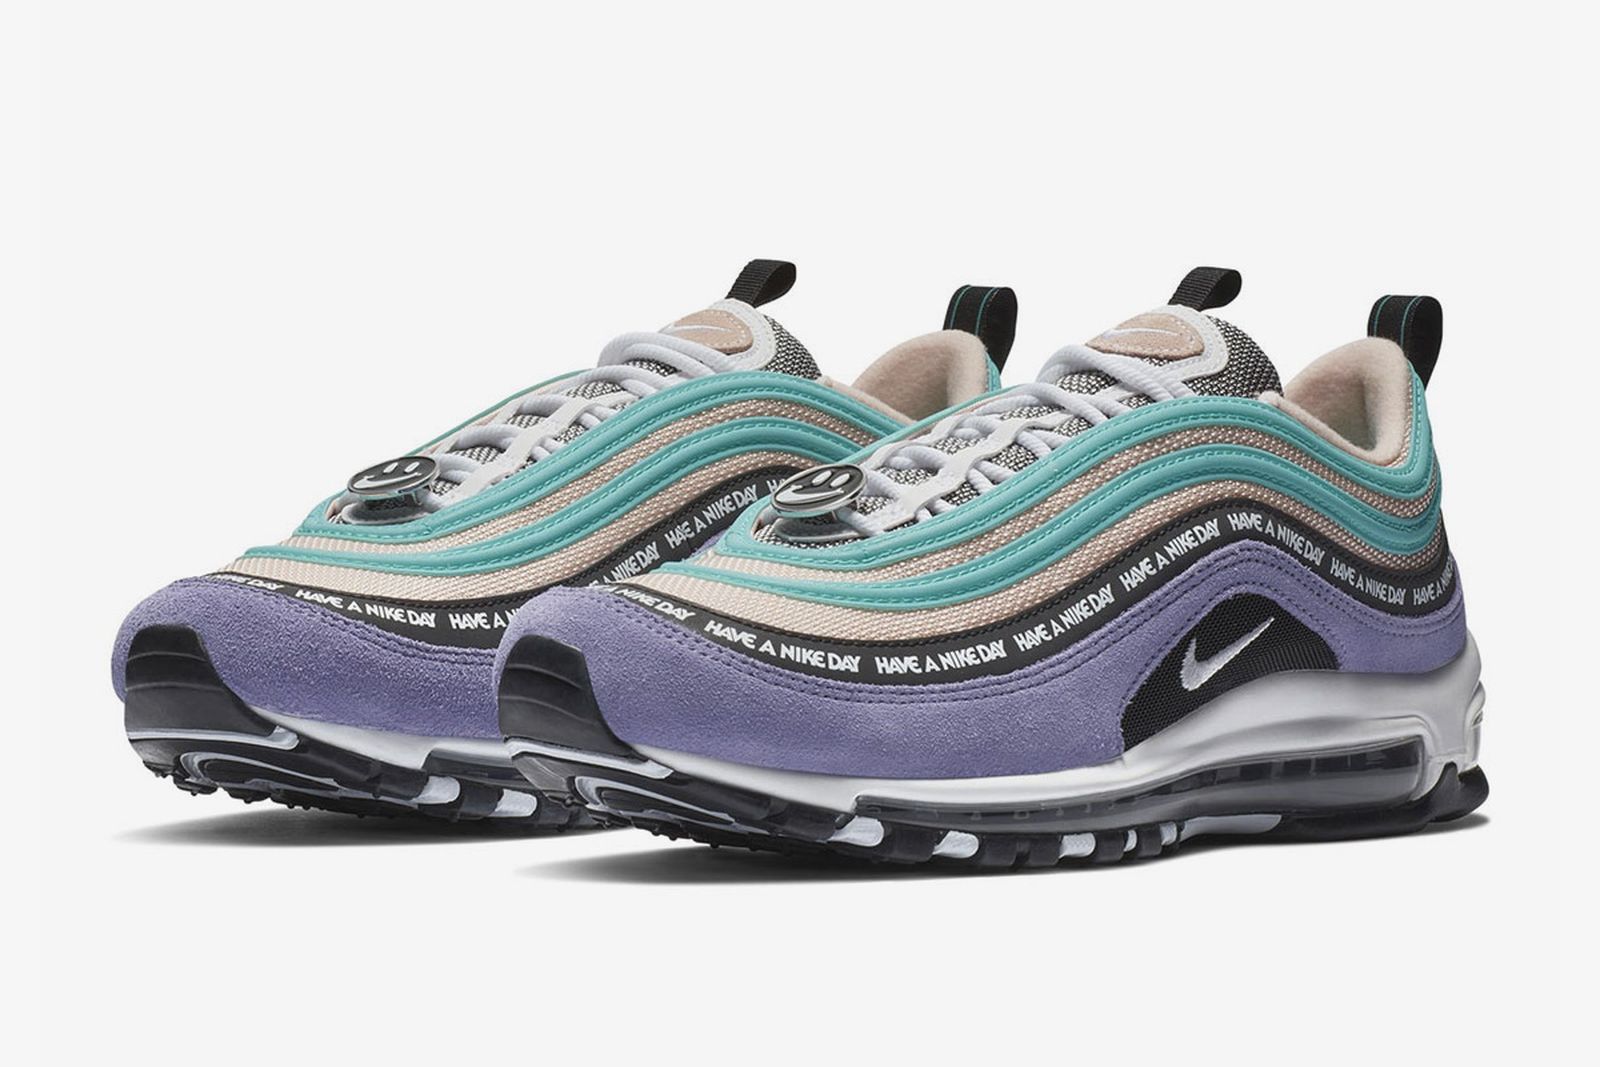 Tuesday Formulate weekend Nike Air Max 97 "Have A Nice Day" Product Shots Surface Online